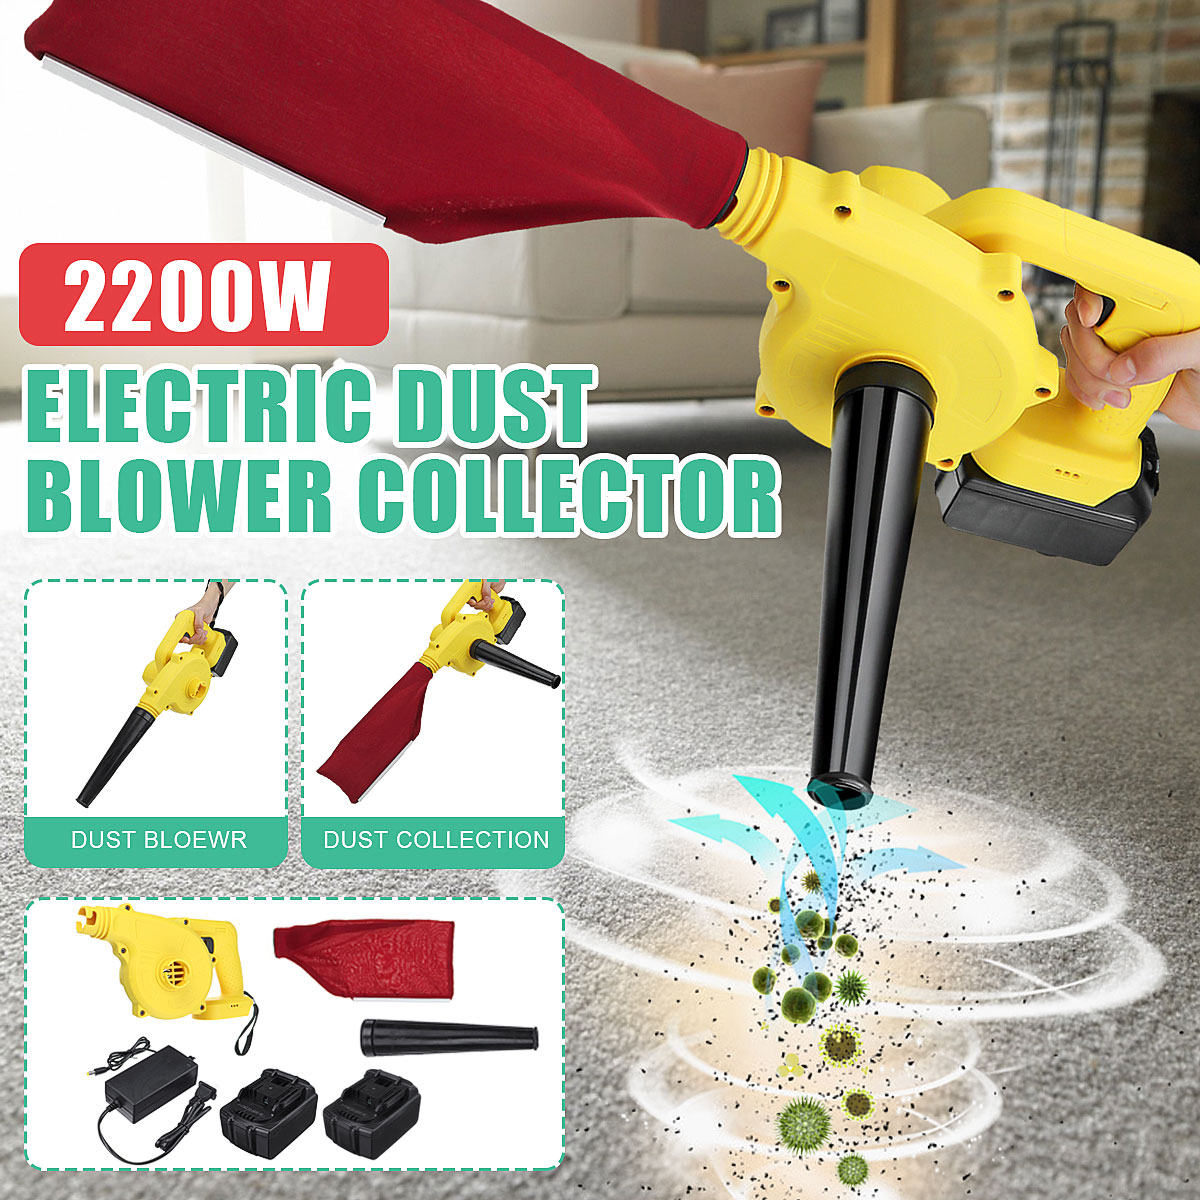 2200W-2In1-24ah-Rechargeable-Electric-Air-Blower-Home-Car-Air-Vacuum-Blower-Leaf-Dust-Sustion-Collec-1857528-2